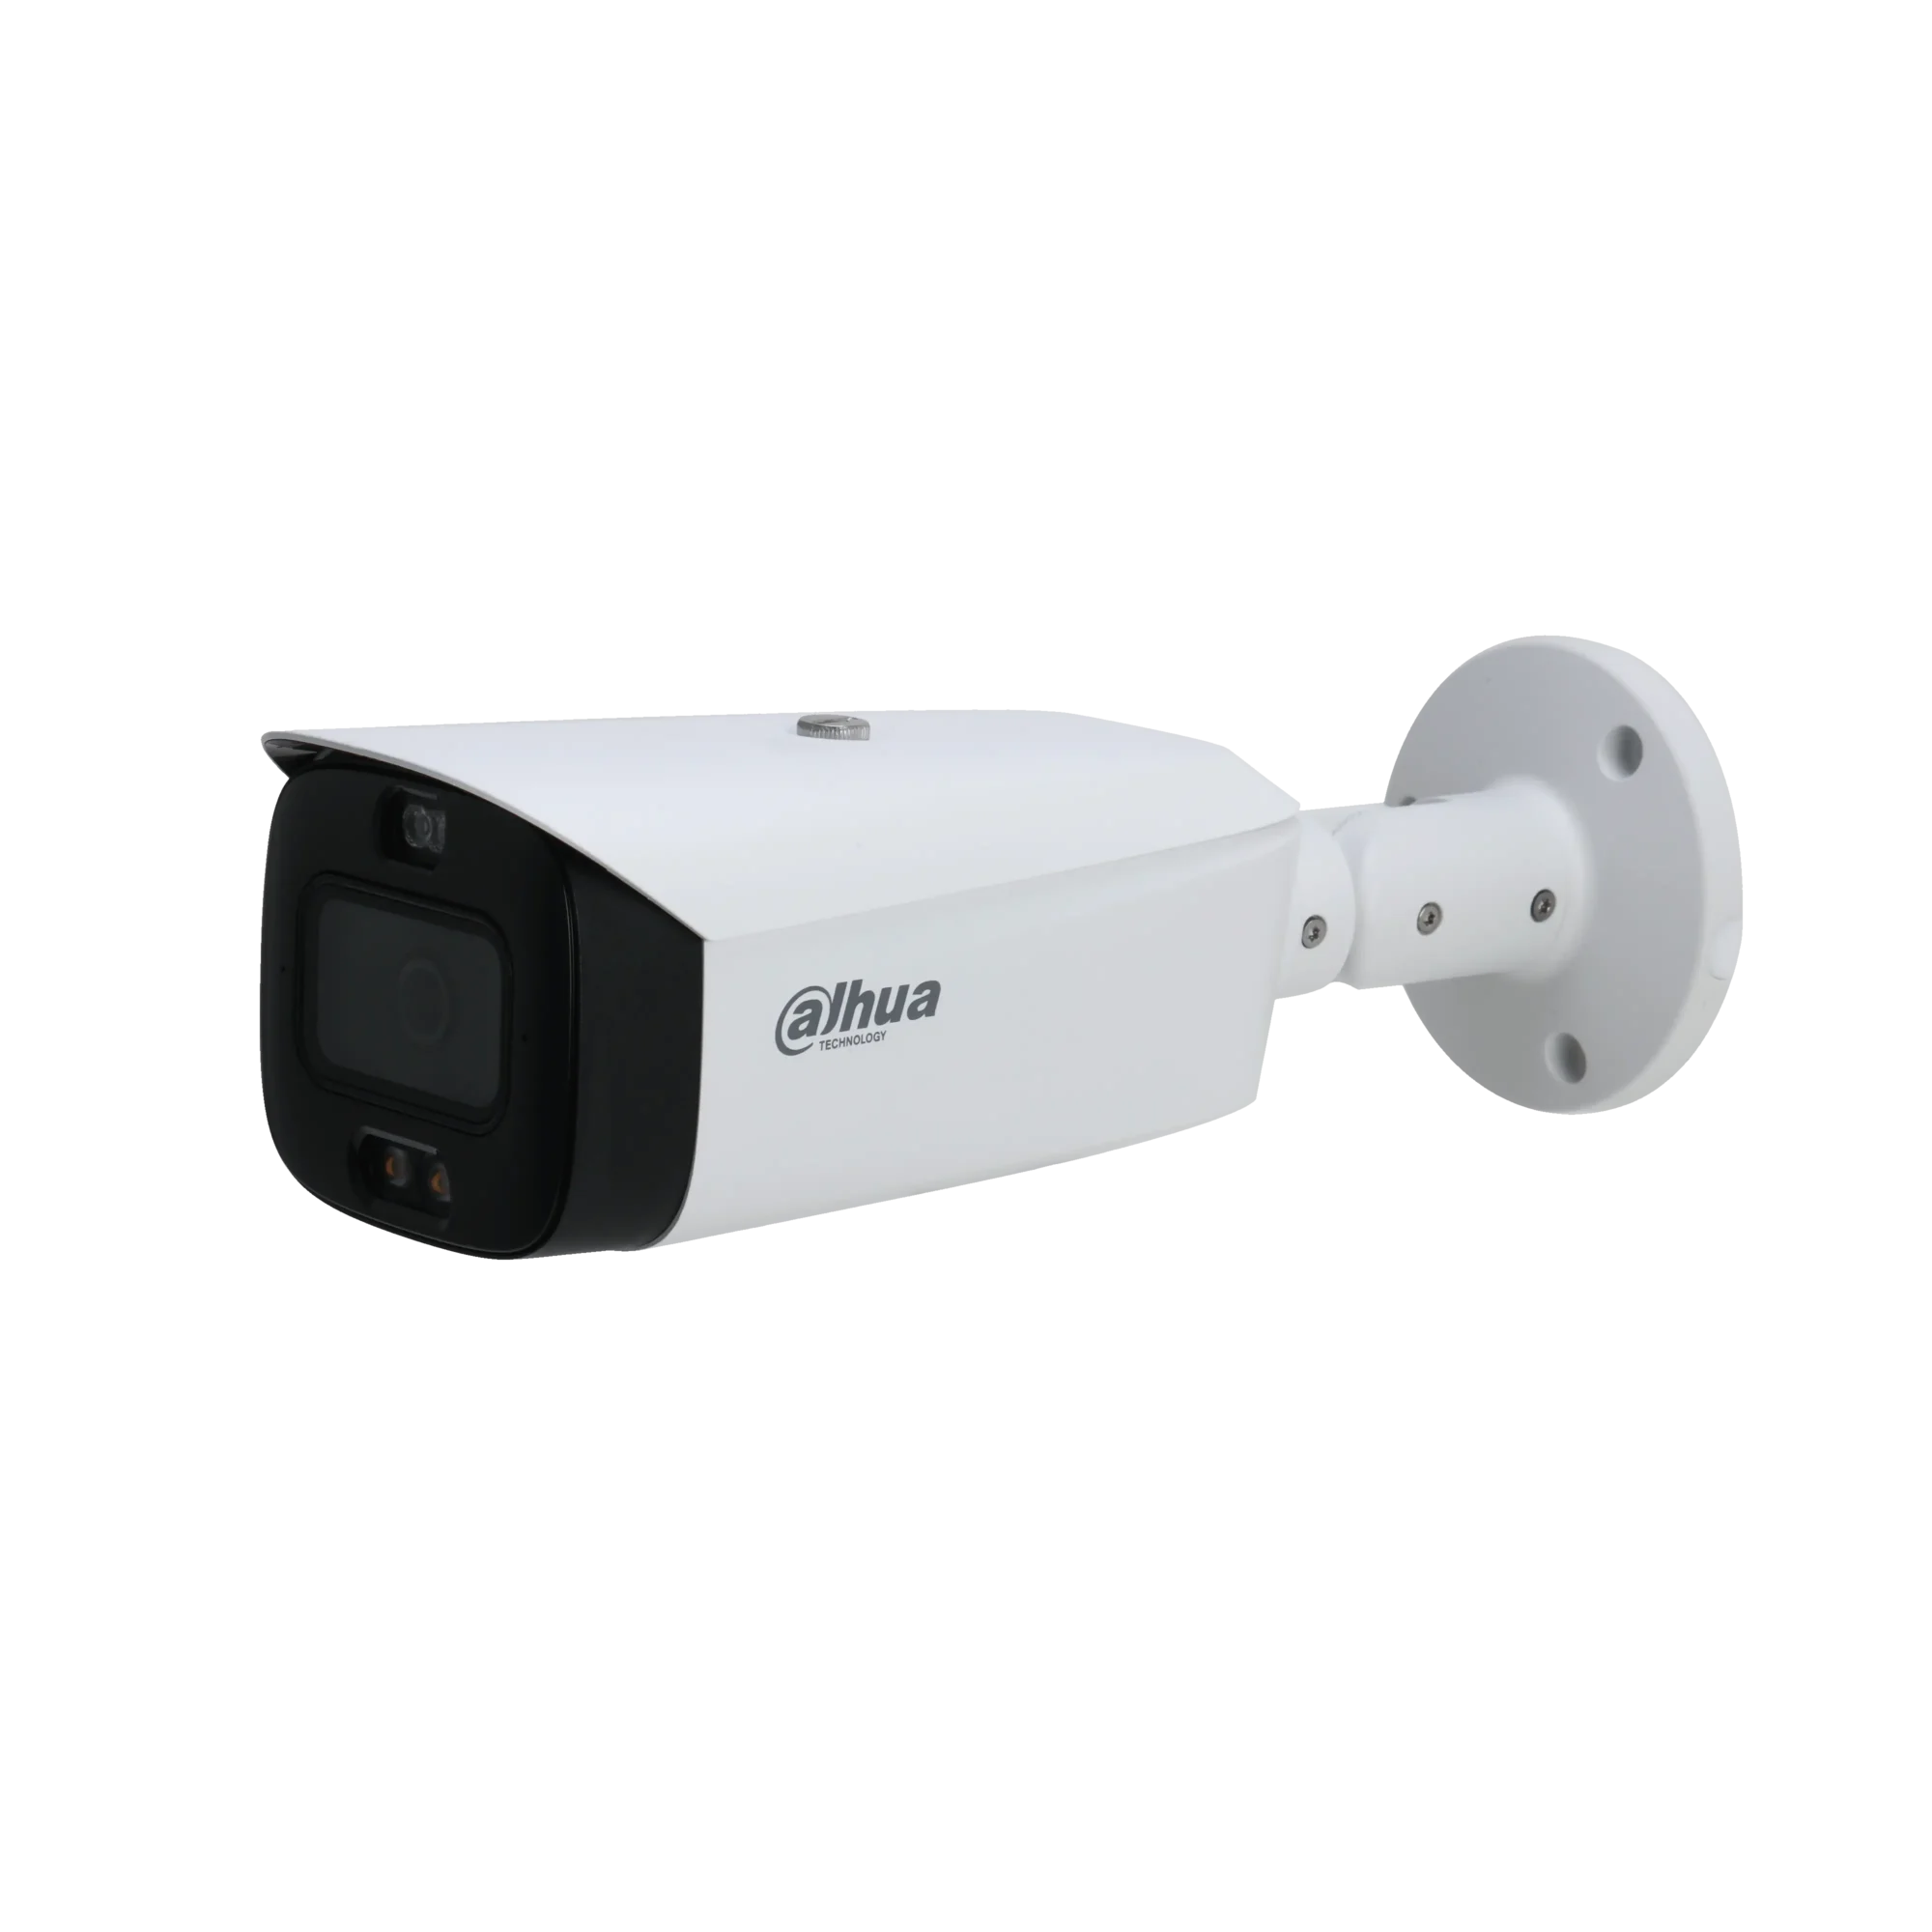 Dahua IPC-HFW3849T1-AS-PV - 8MP Smart Network Bullet Camera with TiOC 2.0 Active Deterrence - wall mounted